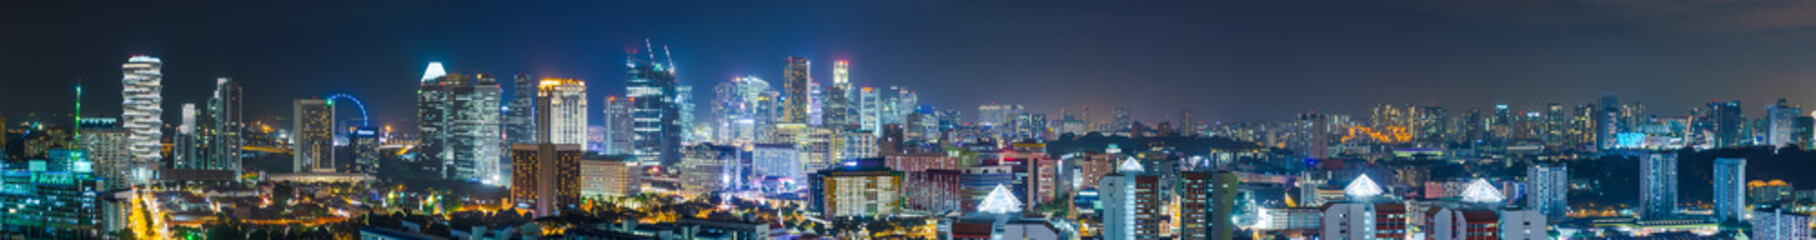 Panorama of downtown Singapore with Business district and Flyer wheel, at night